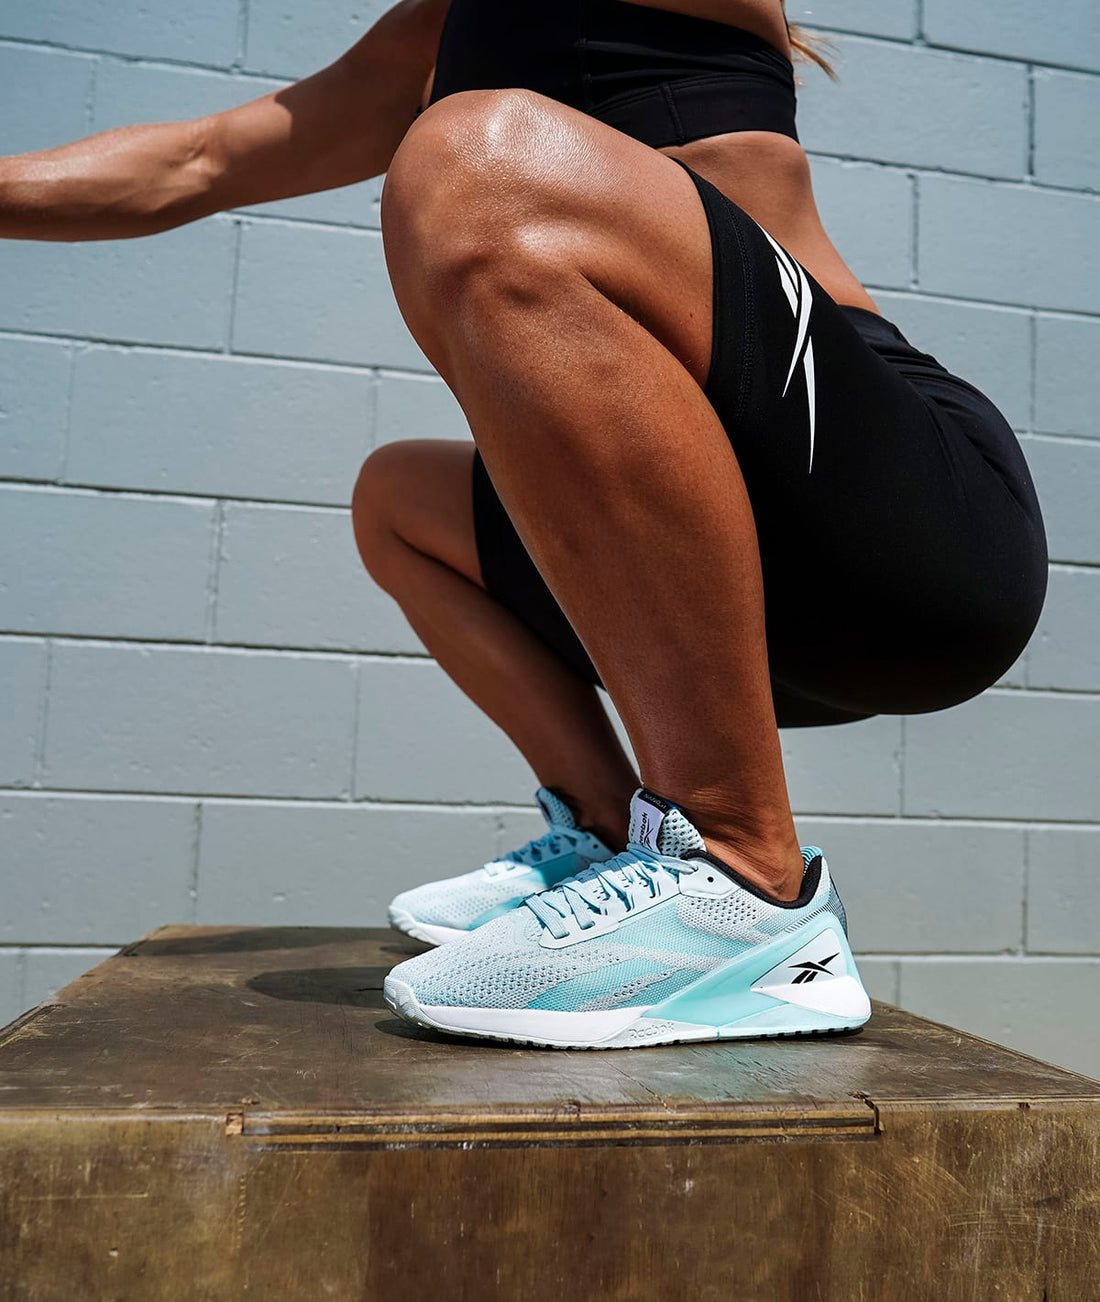 Best Gym Shoes for Women: What Is Right For Your Workout